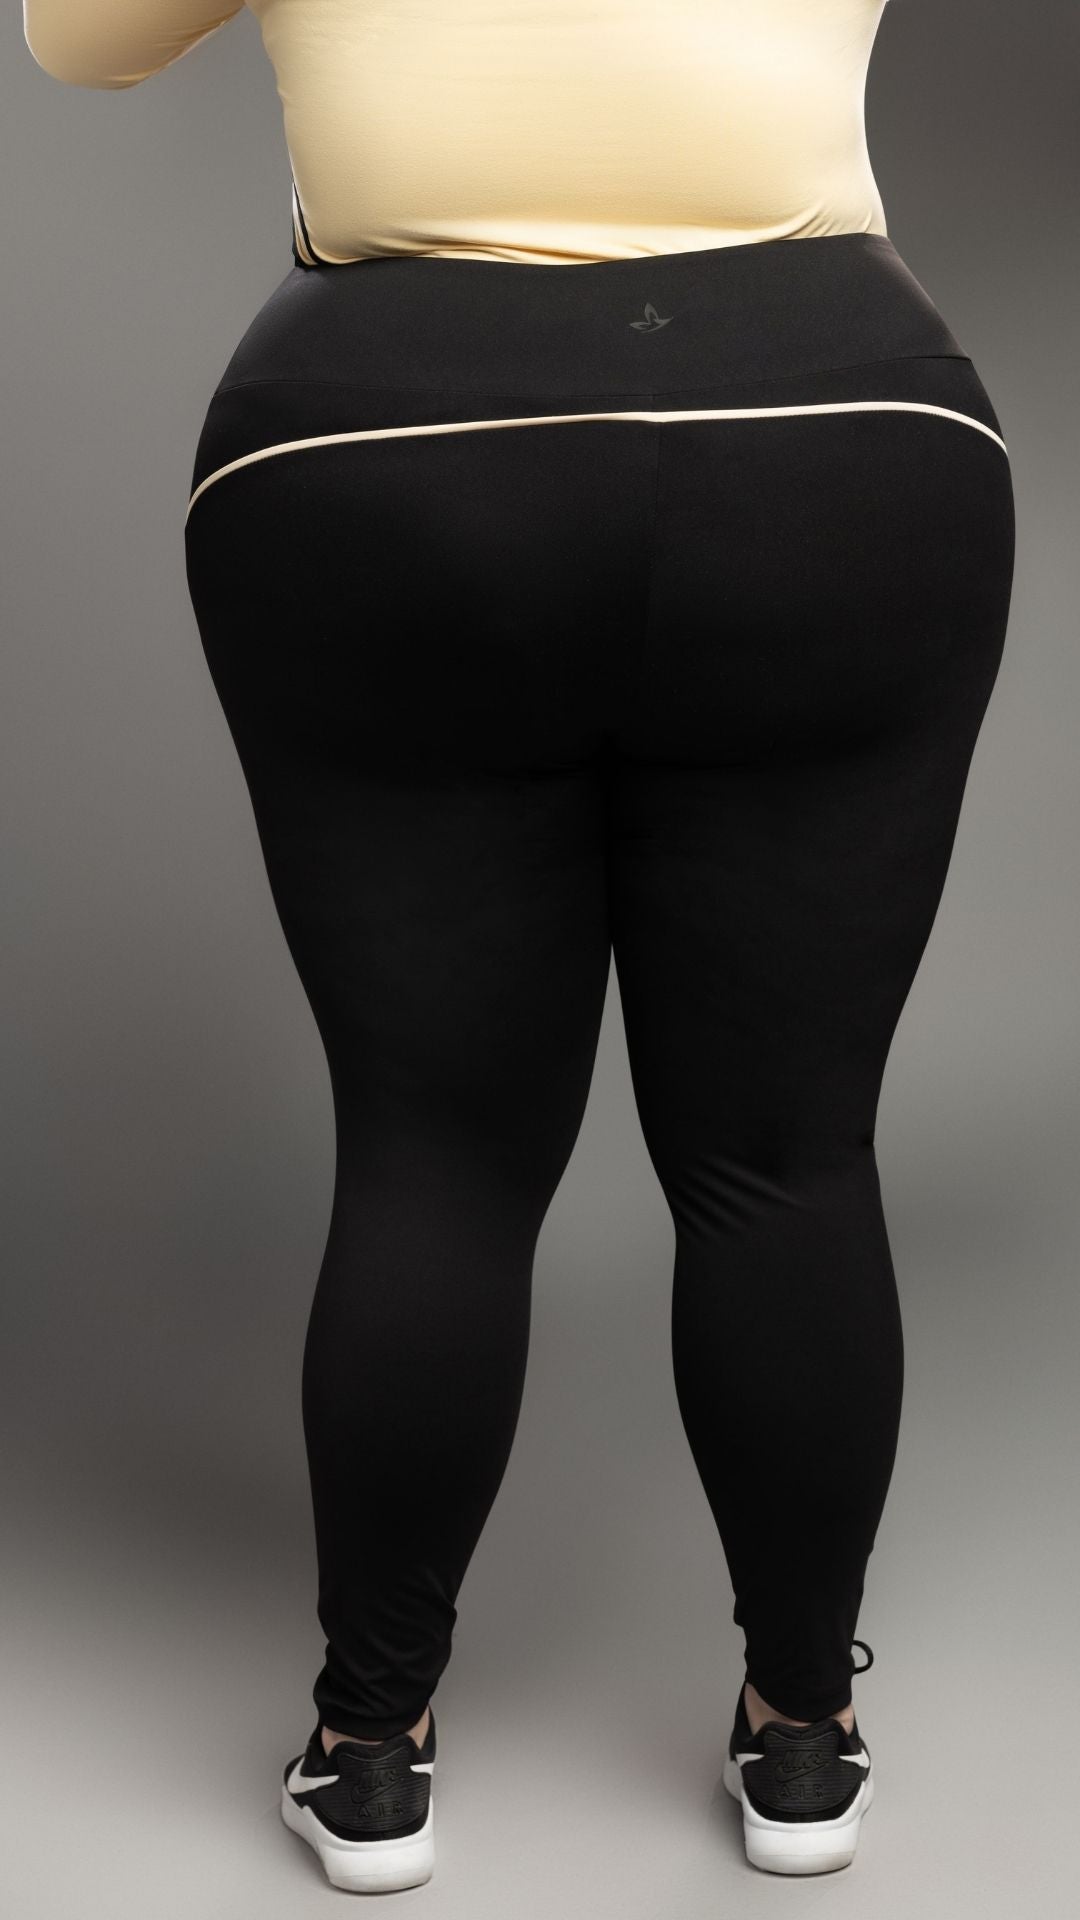 Stitched Black Leggings w/ Piping